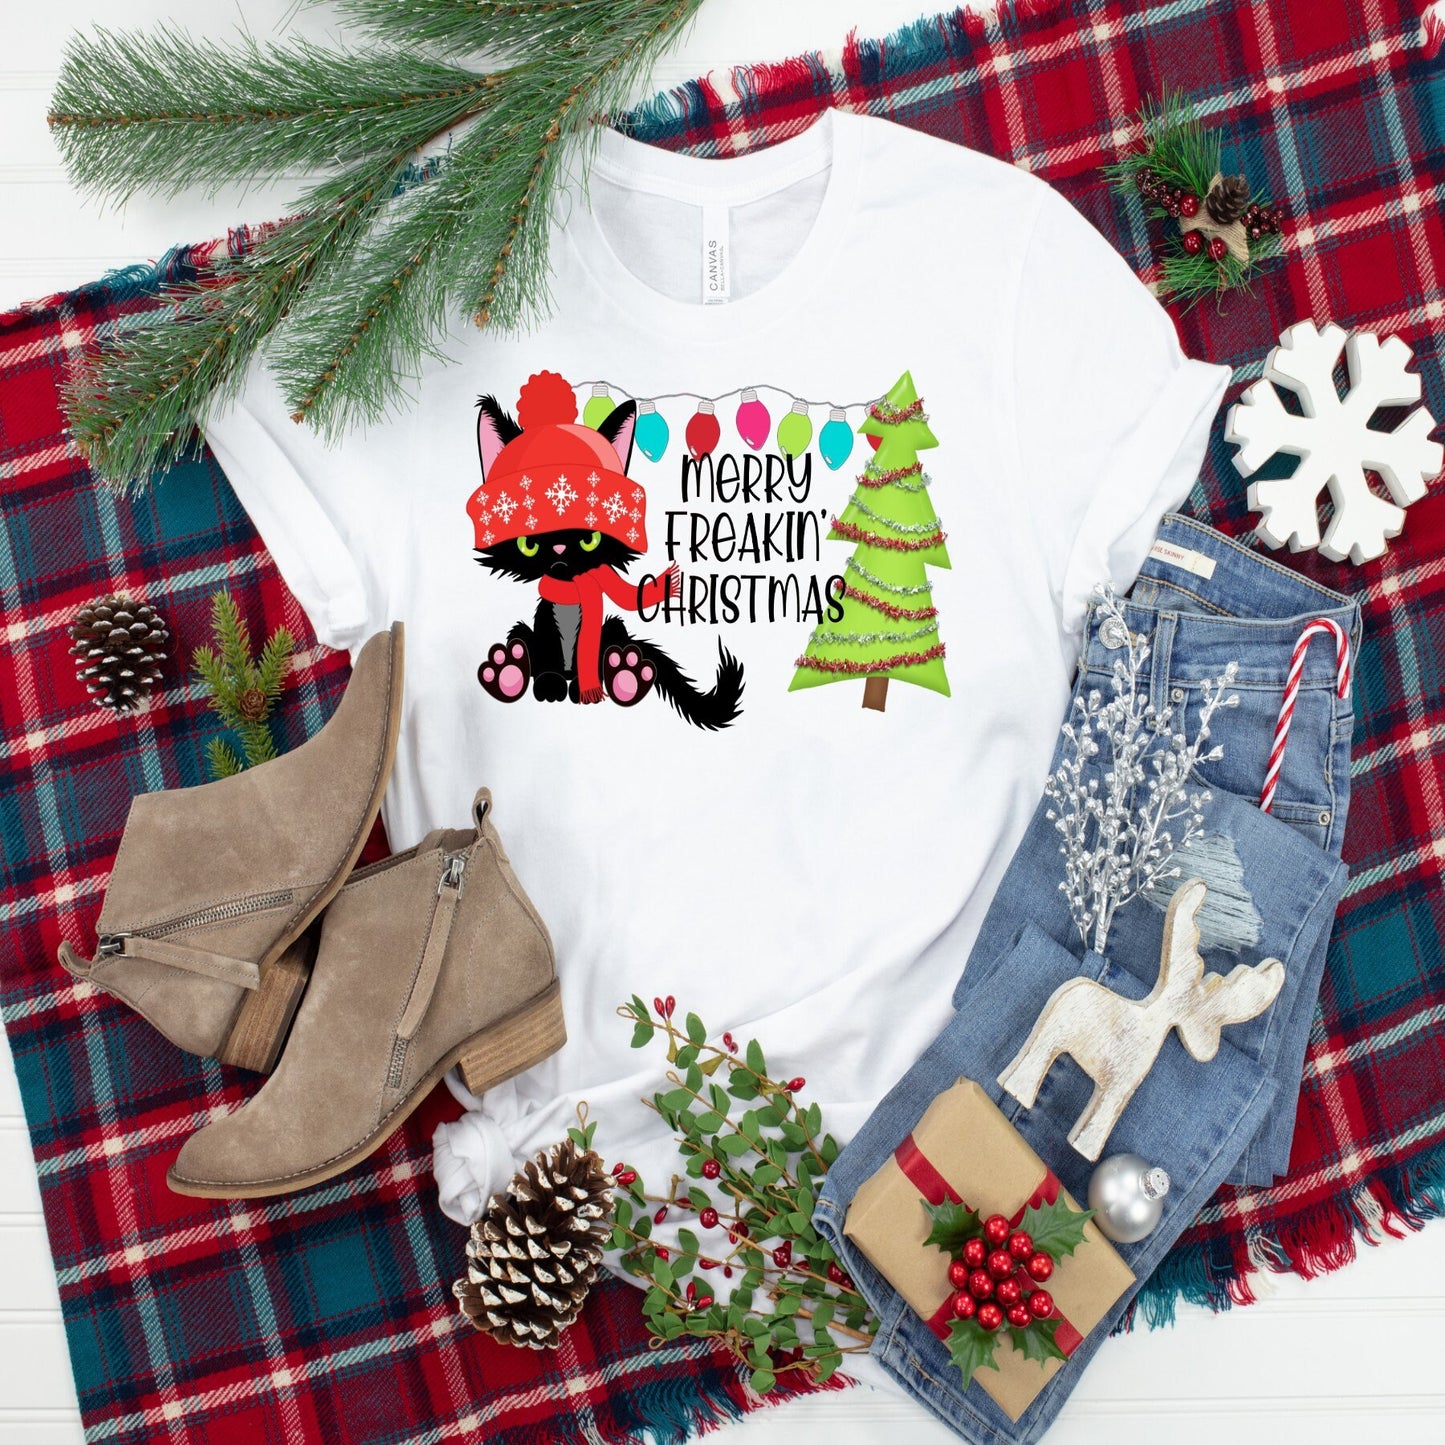 Cat, Merry Freakin Christmas,  Christmas Cat, Not A Happy Kitty For Christmas, Angry Cat Christmas, Funny Cat, Finny Kitten, Christmas tee